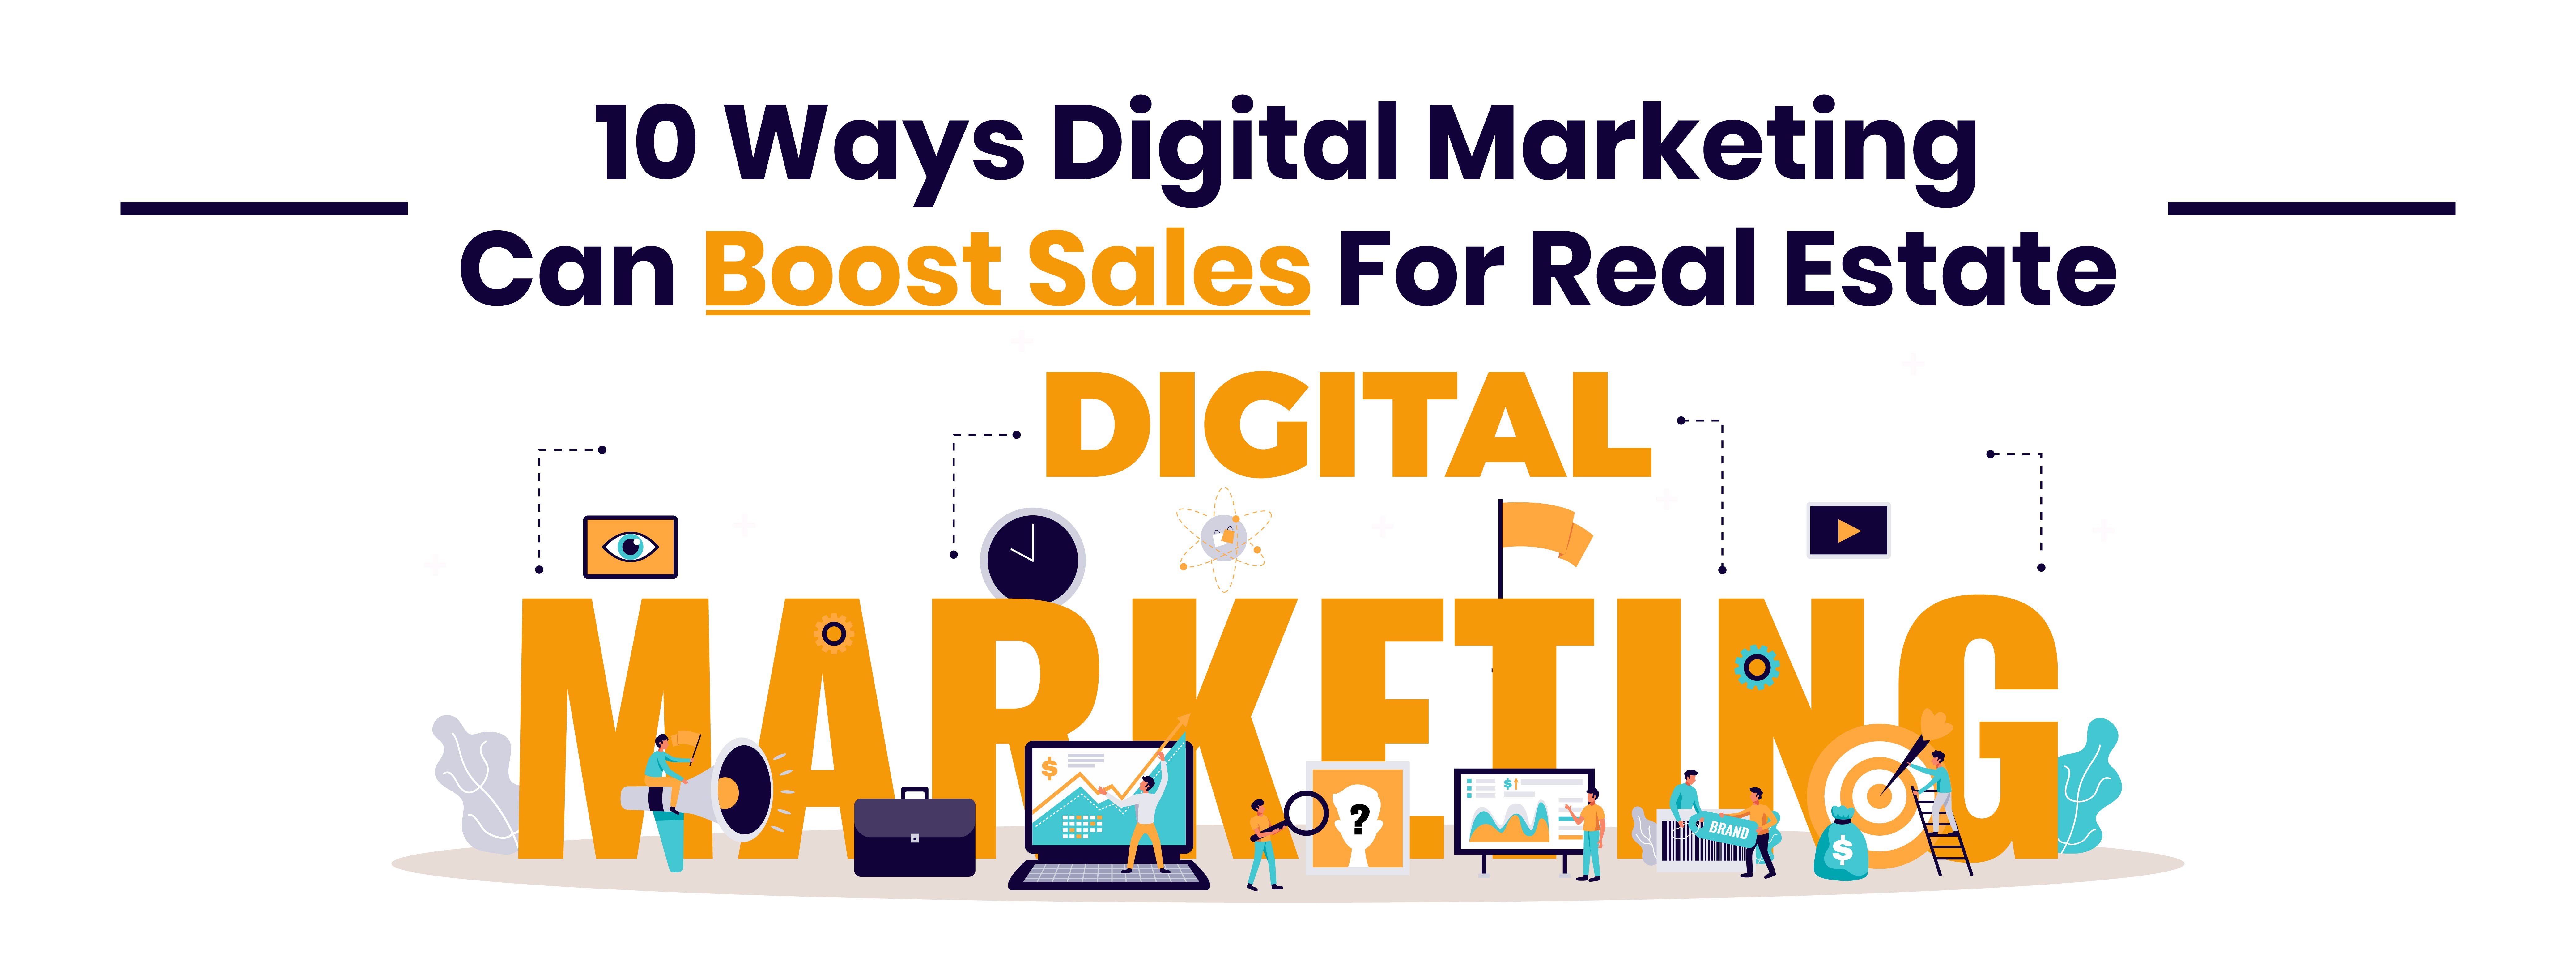 10-ways-digital-marketing-can-boost-sales-for-real-estate